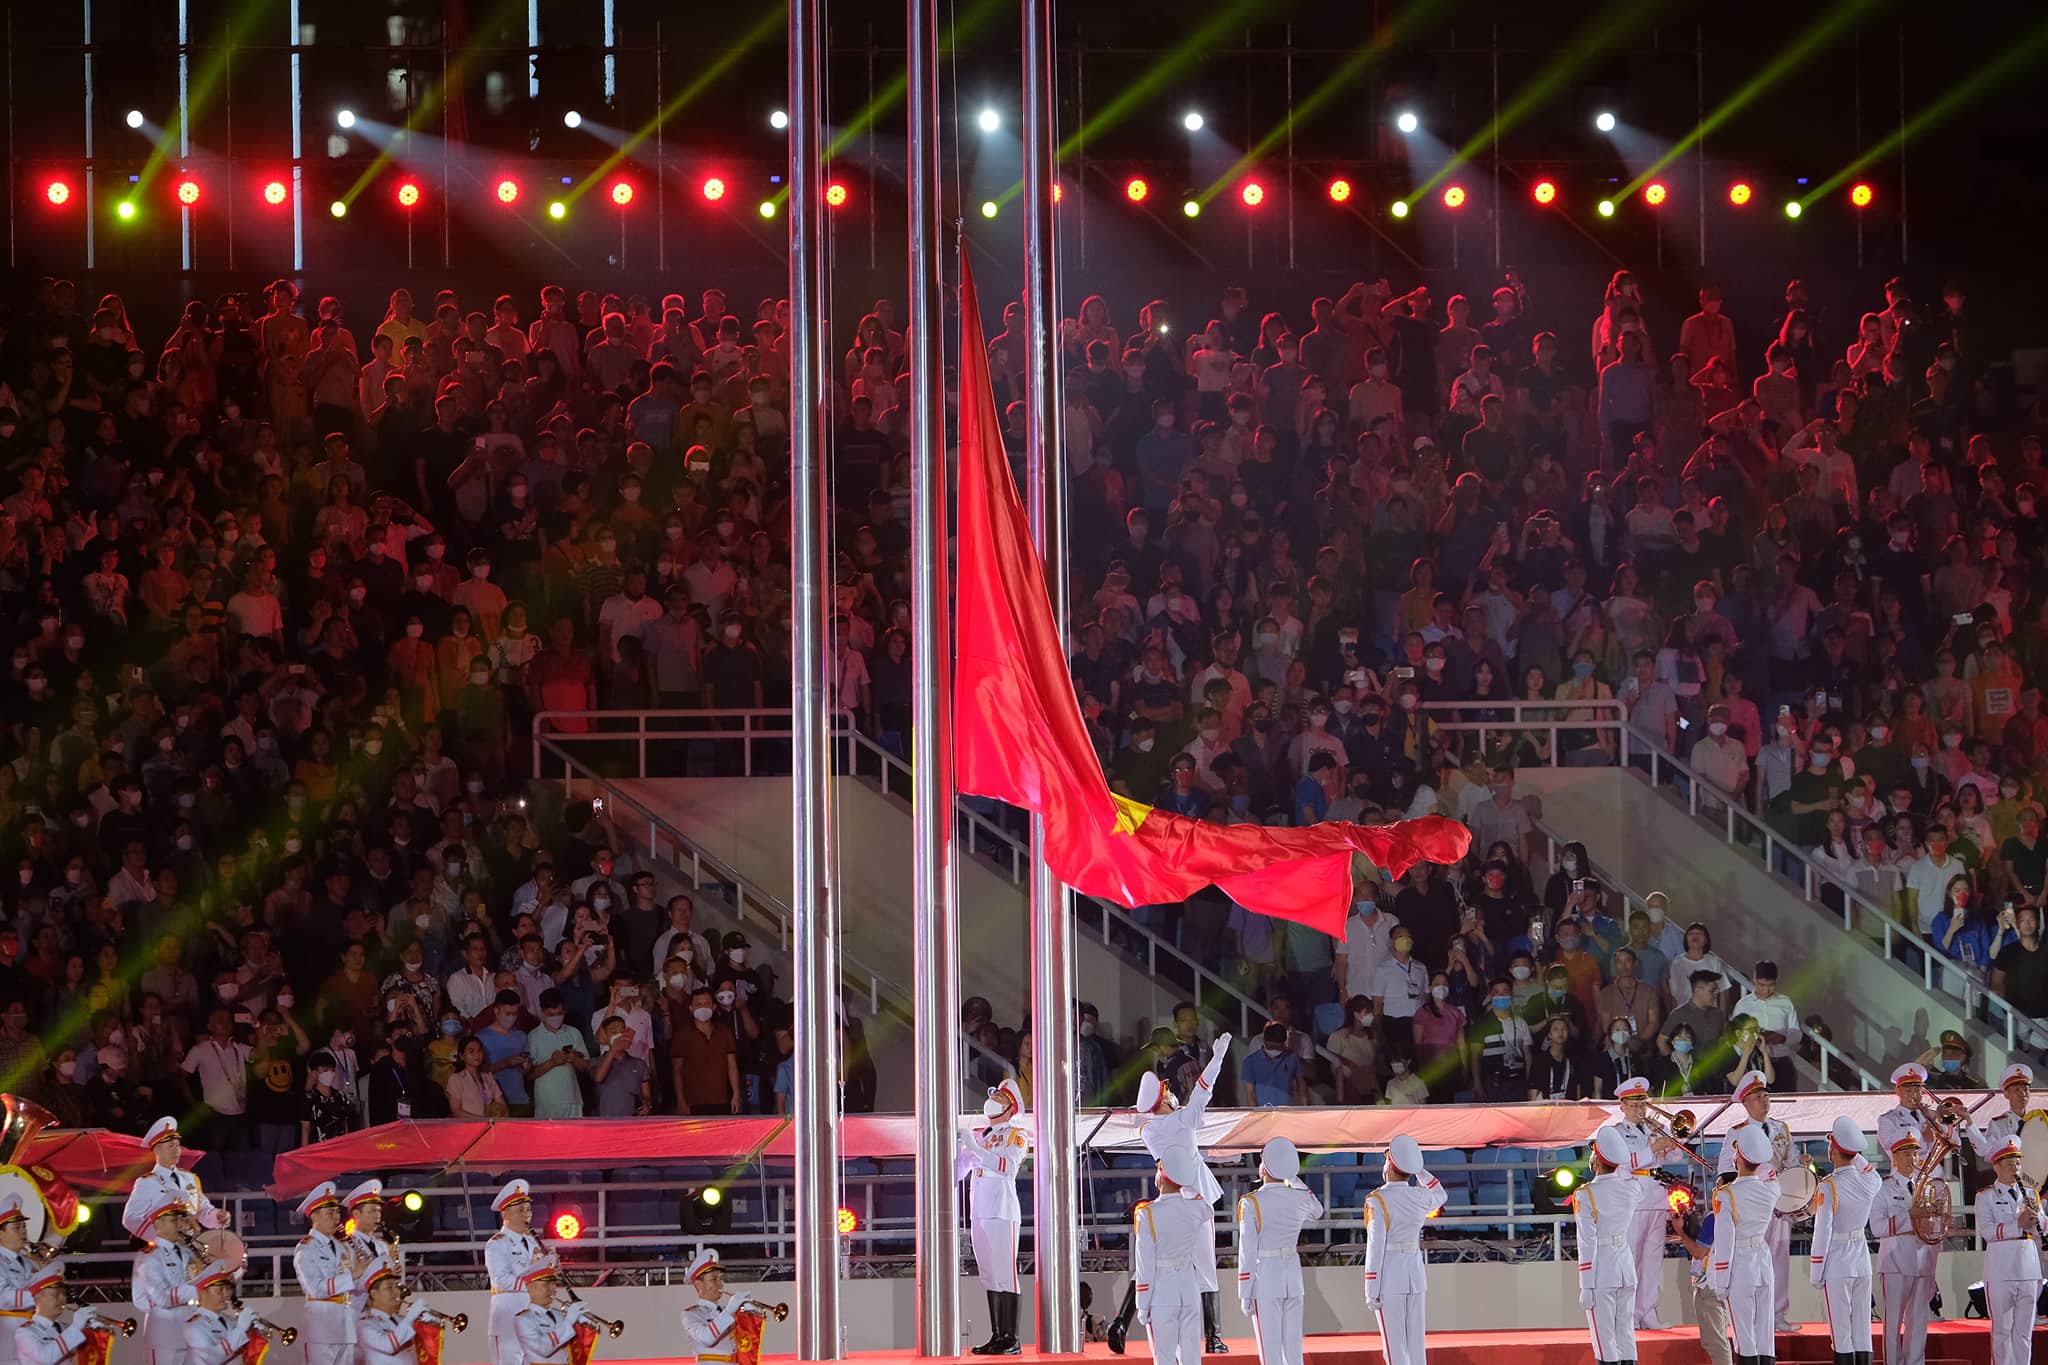 Vietnam's national flag is hoisted during the opening ceremony of the 31st Southeast Asian (SEA) Games at My Dinh National Stadium in Hanoi, Vietnam, May 12, 2022. Photo: Nam Tran / Tuoi Tre